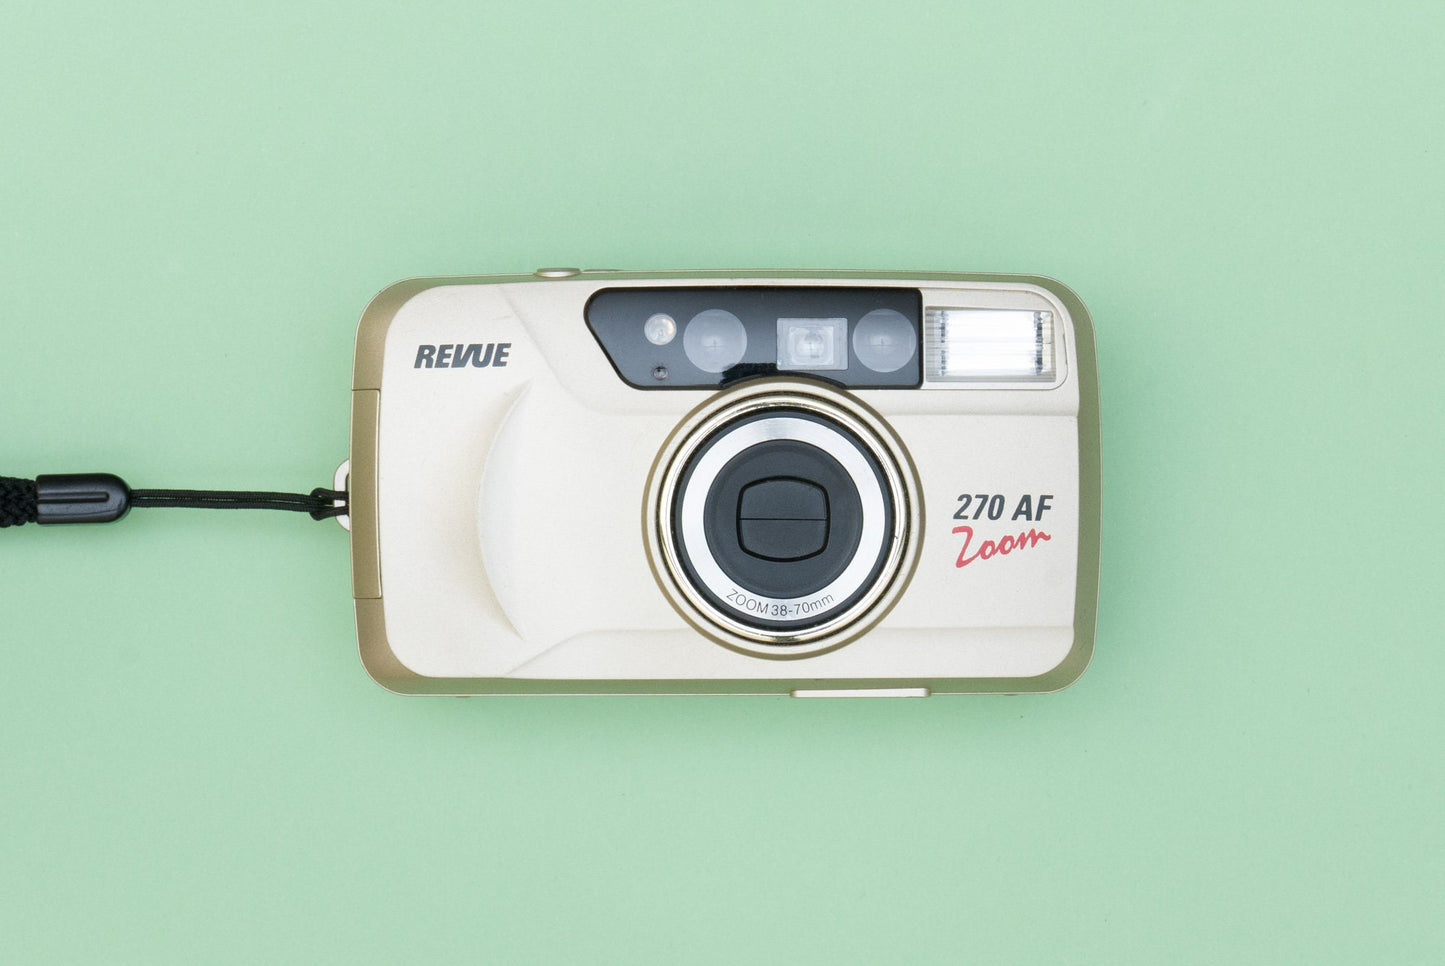 Revue 270 AF Zoom Compact Point and Shoot 35mm Film Camera